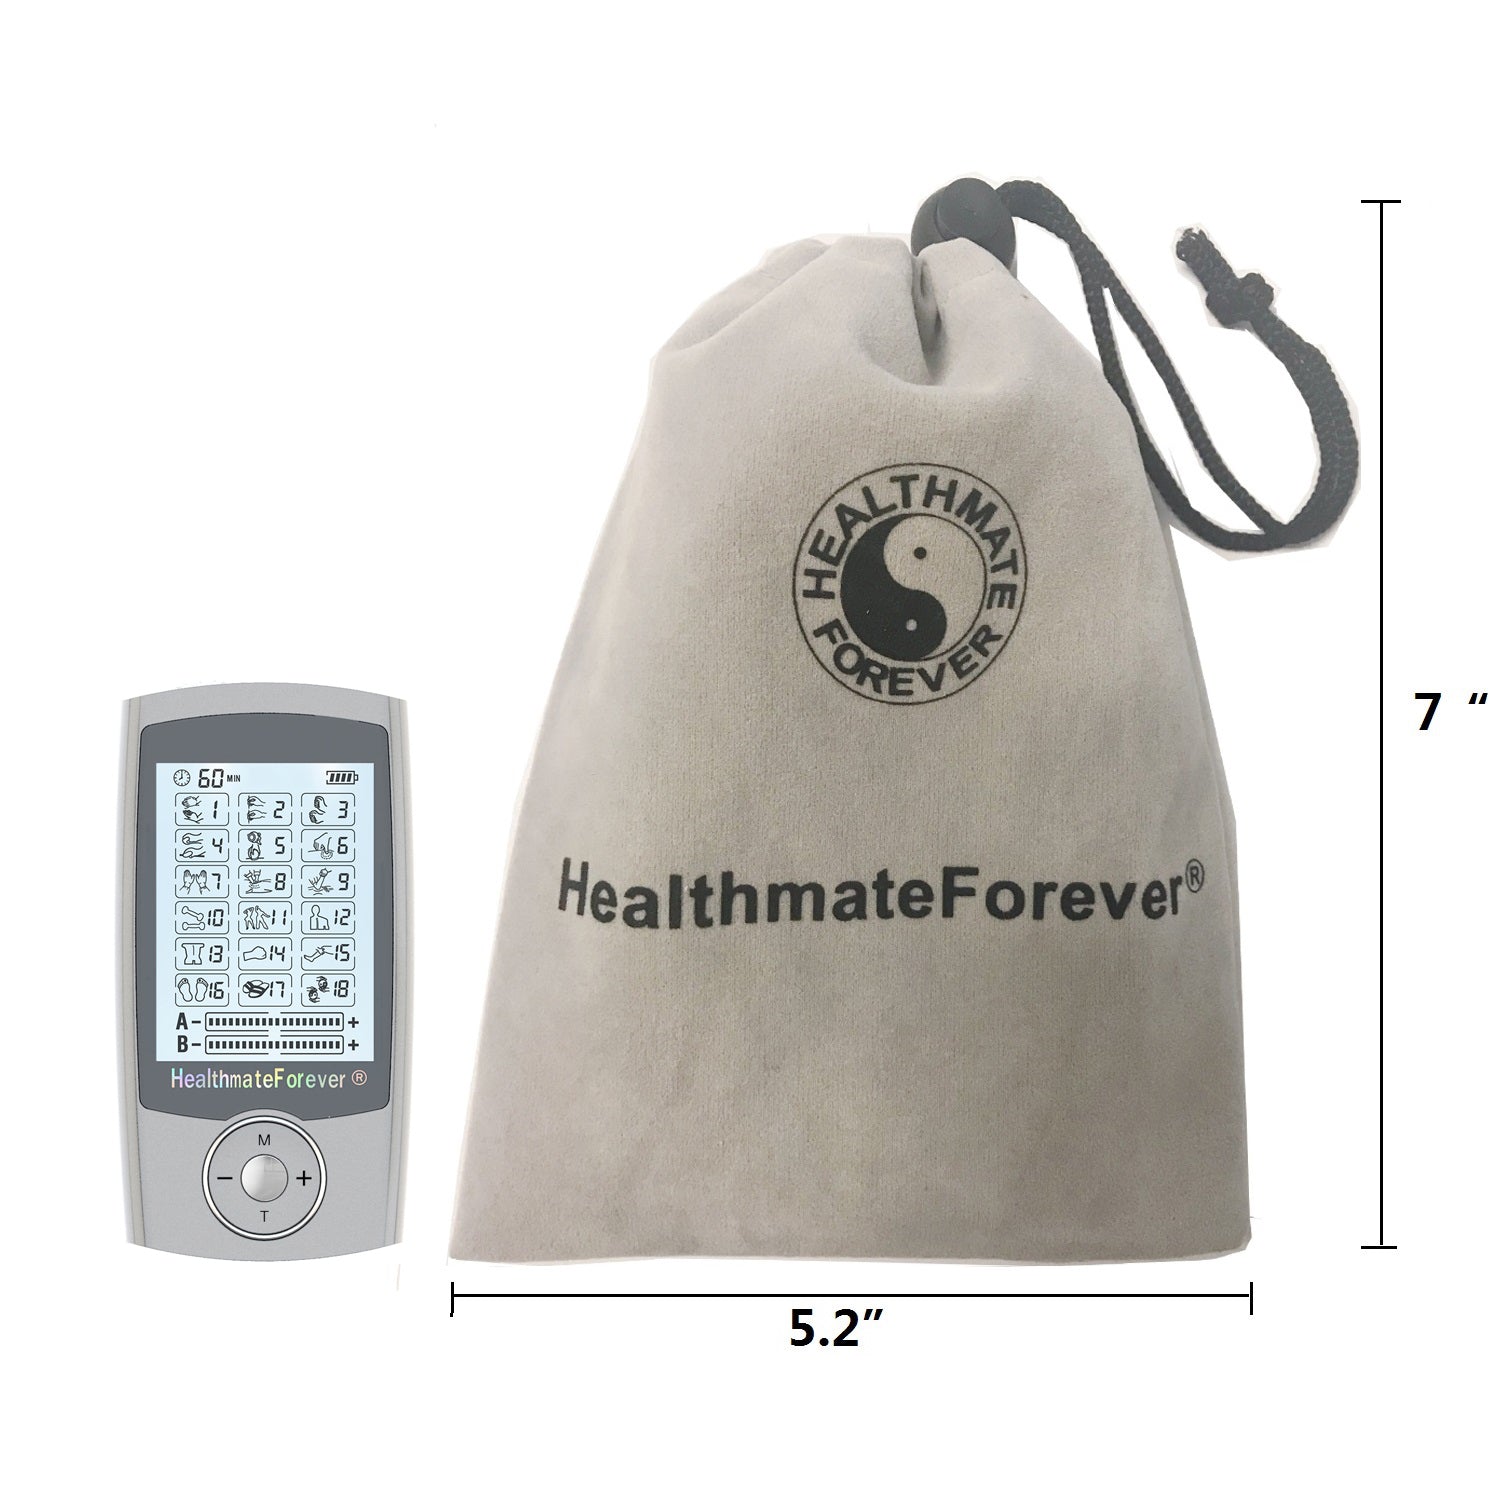 PRO18AB Pain Relief TENS Unit & Muscle Stimulator - 2 Year Warranty - HealthmateForever.com